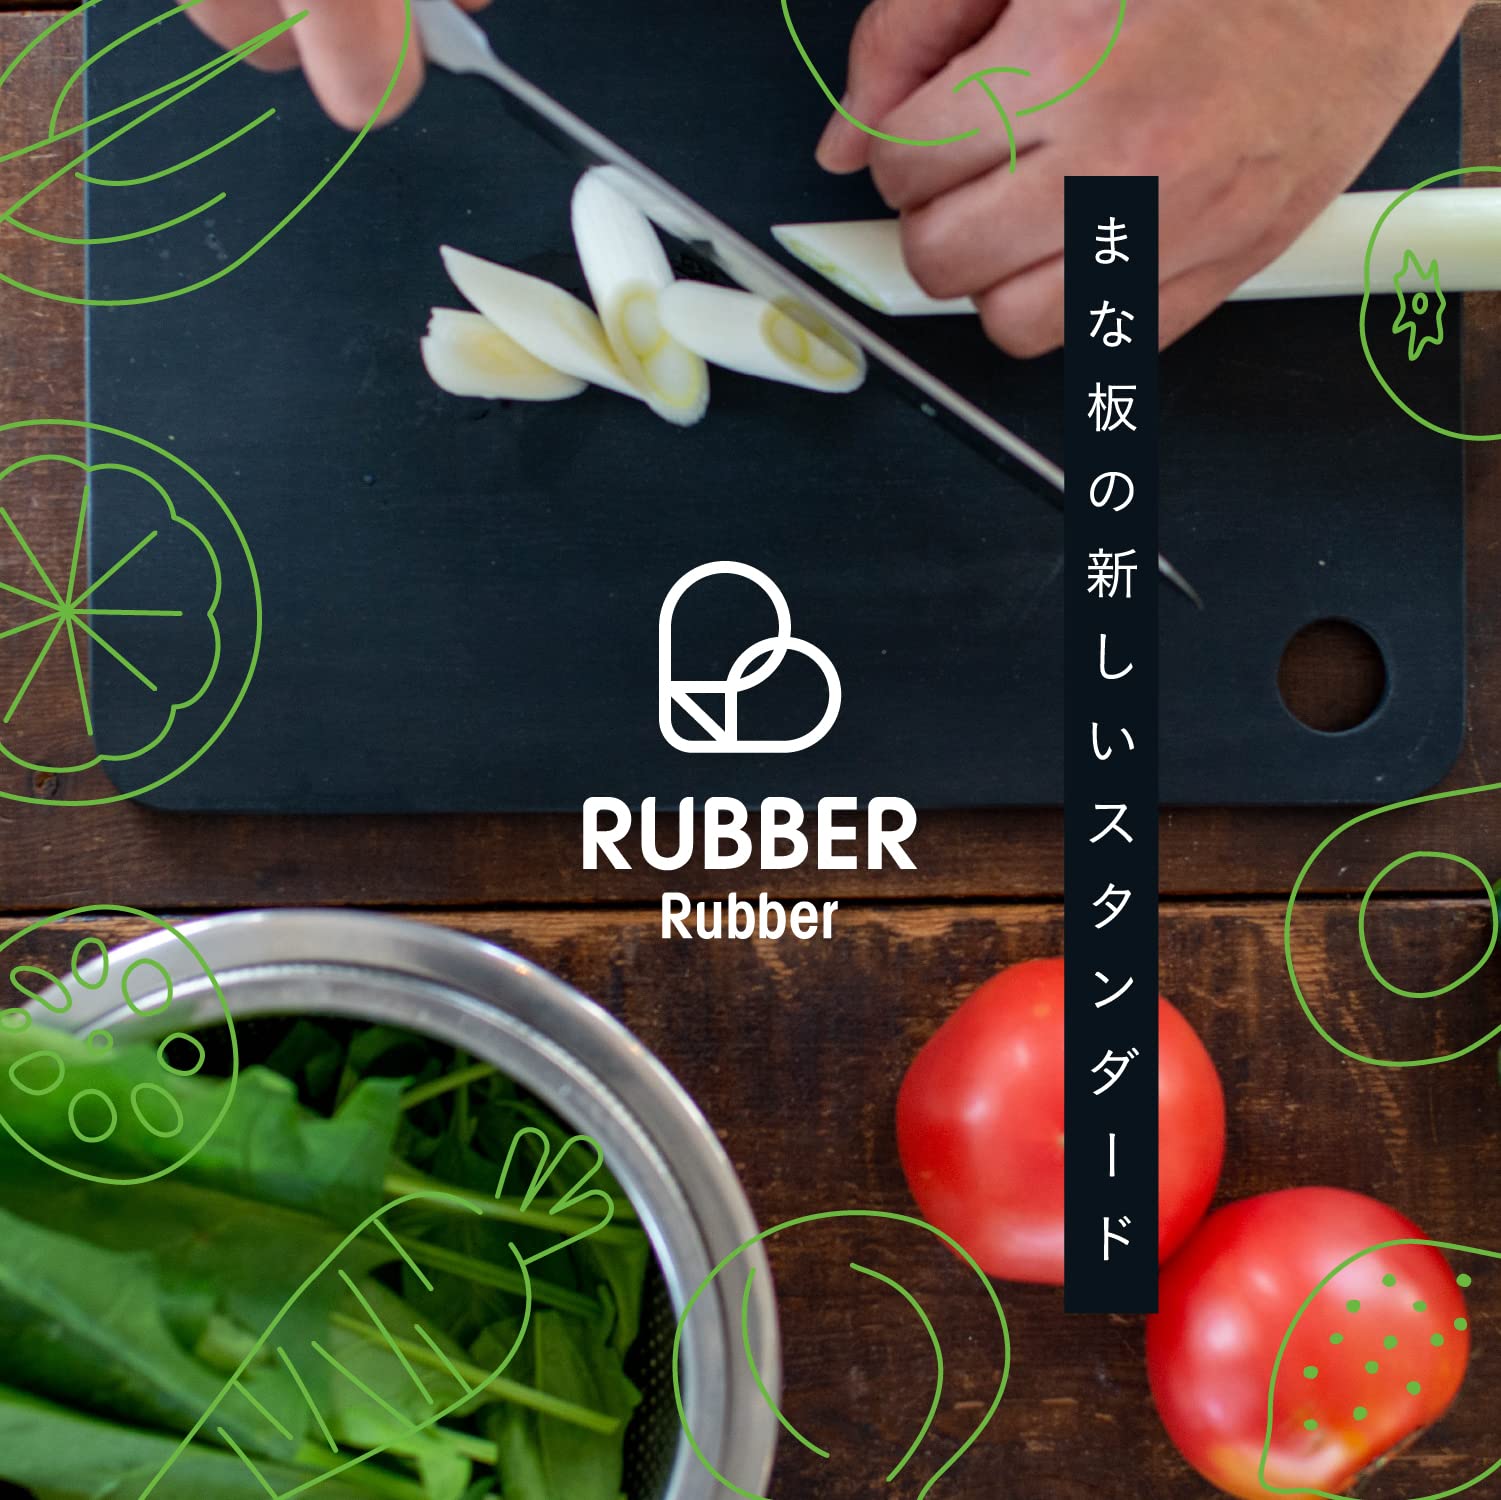 RUBBER Rubber NBD003 Rubber Cutting Board, Black, L, Synthetic Rubber, Large, Made in Japan, 14.6 x 9.6 x 0.3 inches (370 x 245 x 8 mm)